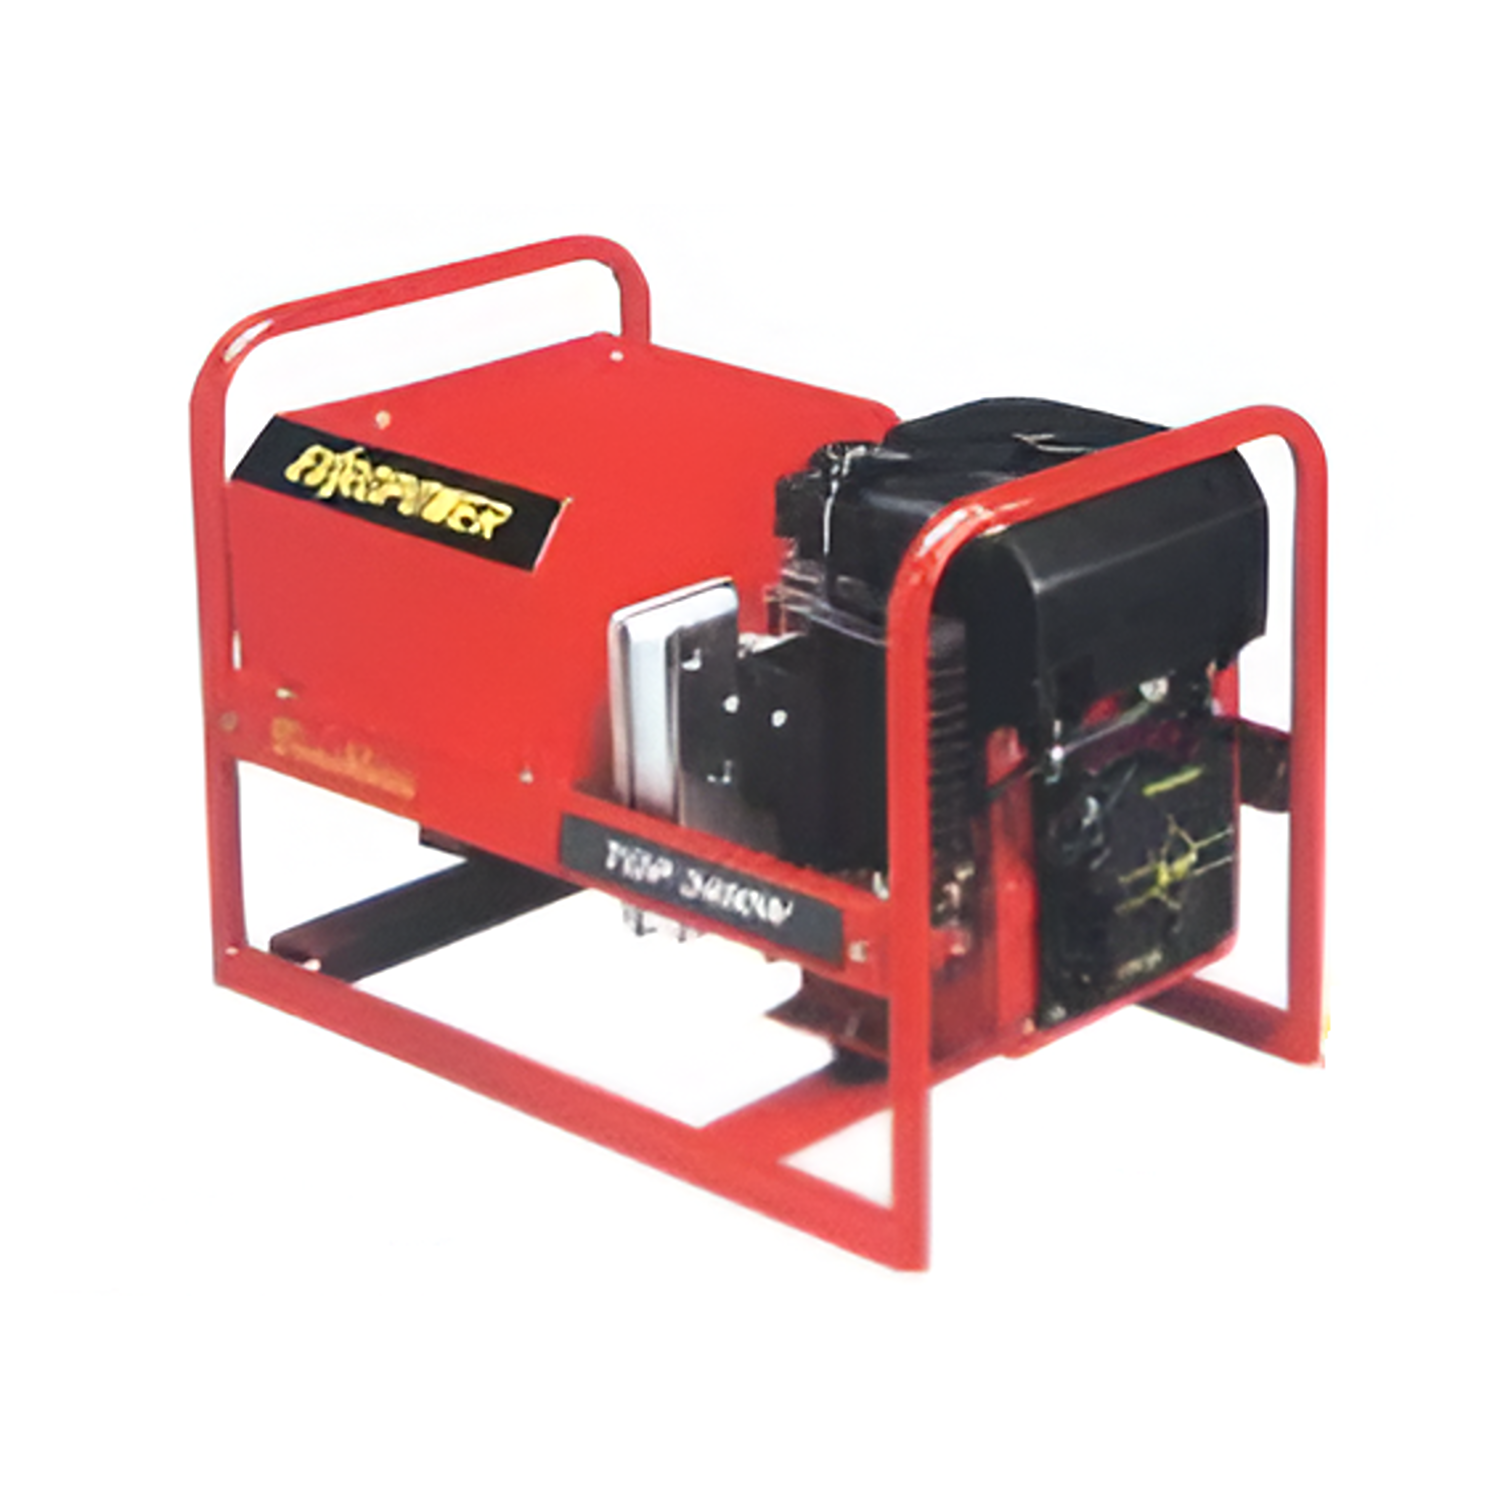 YEW AIK AA00164 TGP Brushless, Air-Cooled Petrol Generator Set - Premium Air-Cooled Petrol Generator Set from YEW AIK - Shop now at Yew Aik.